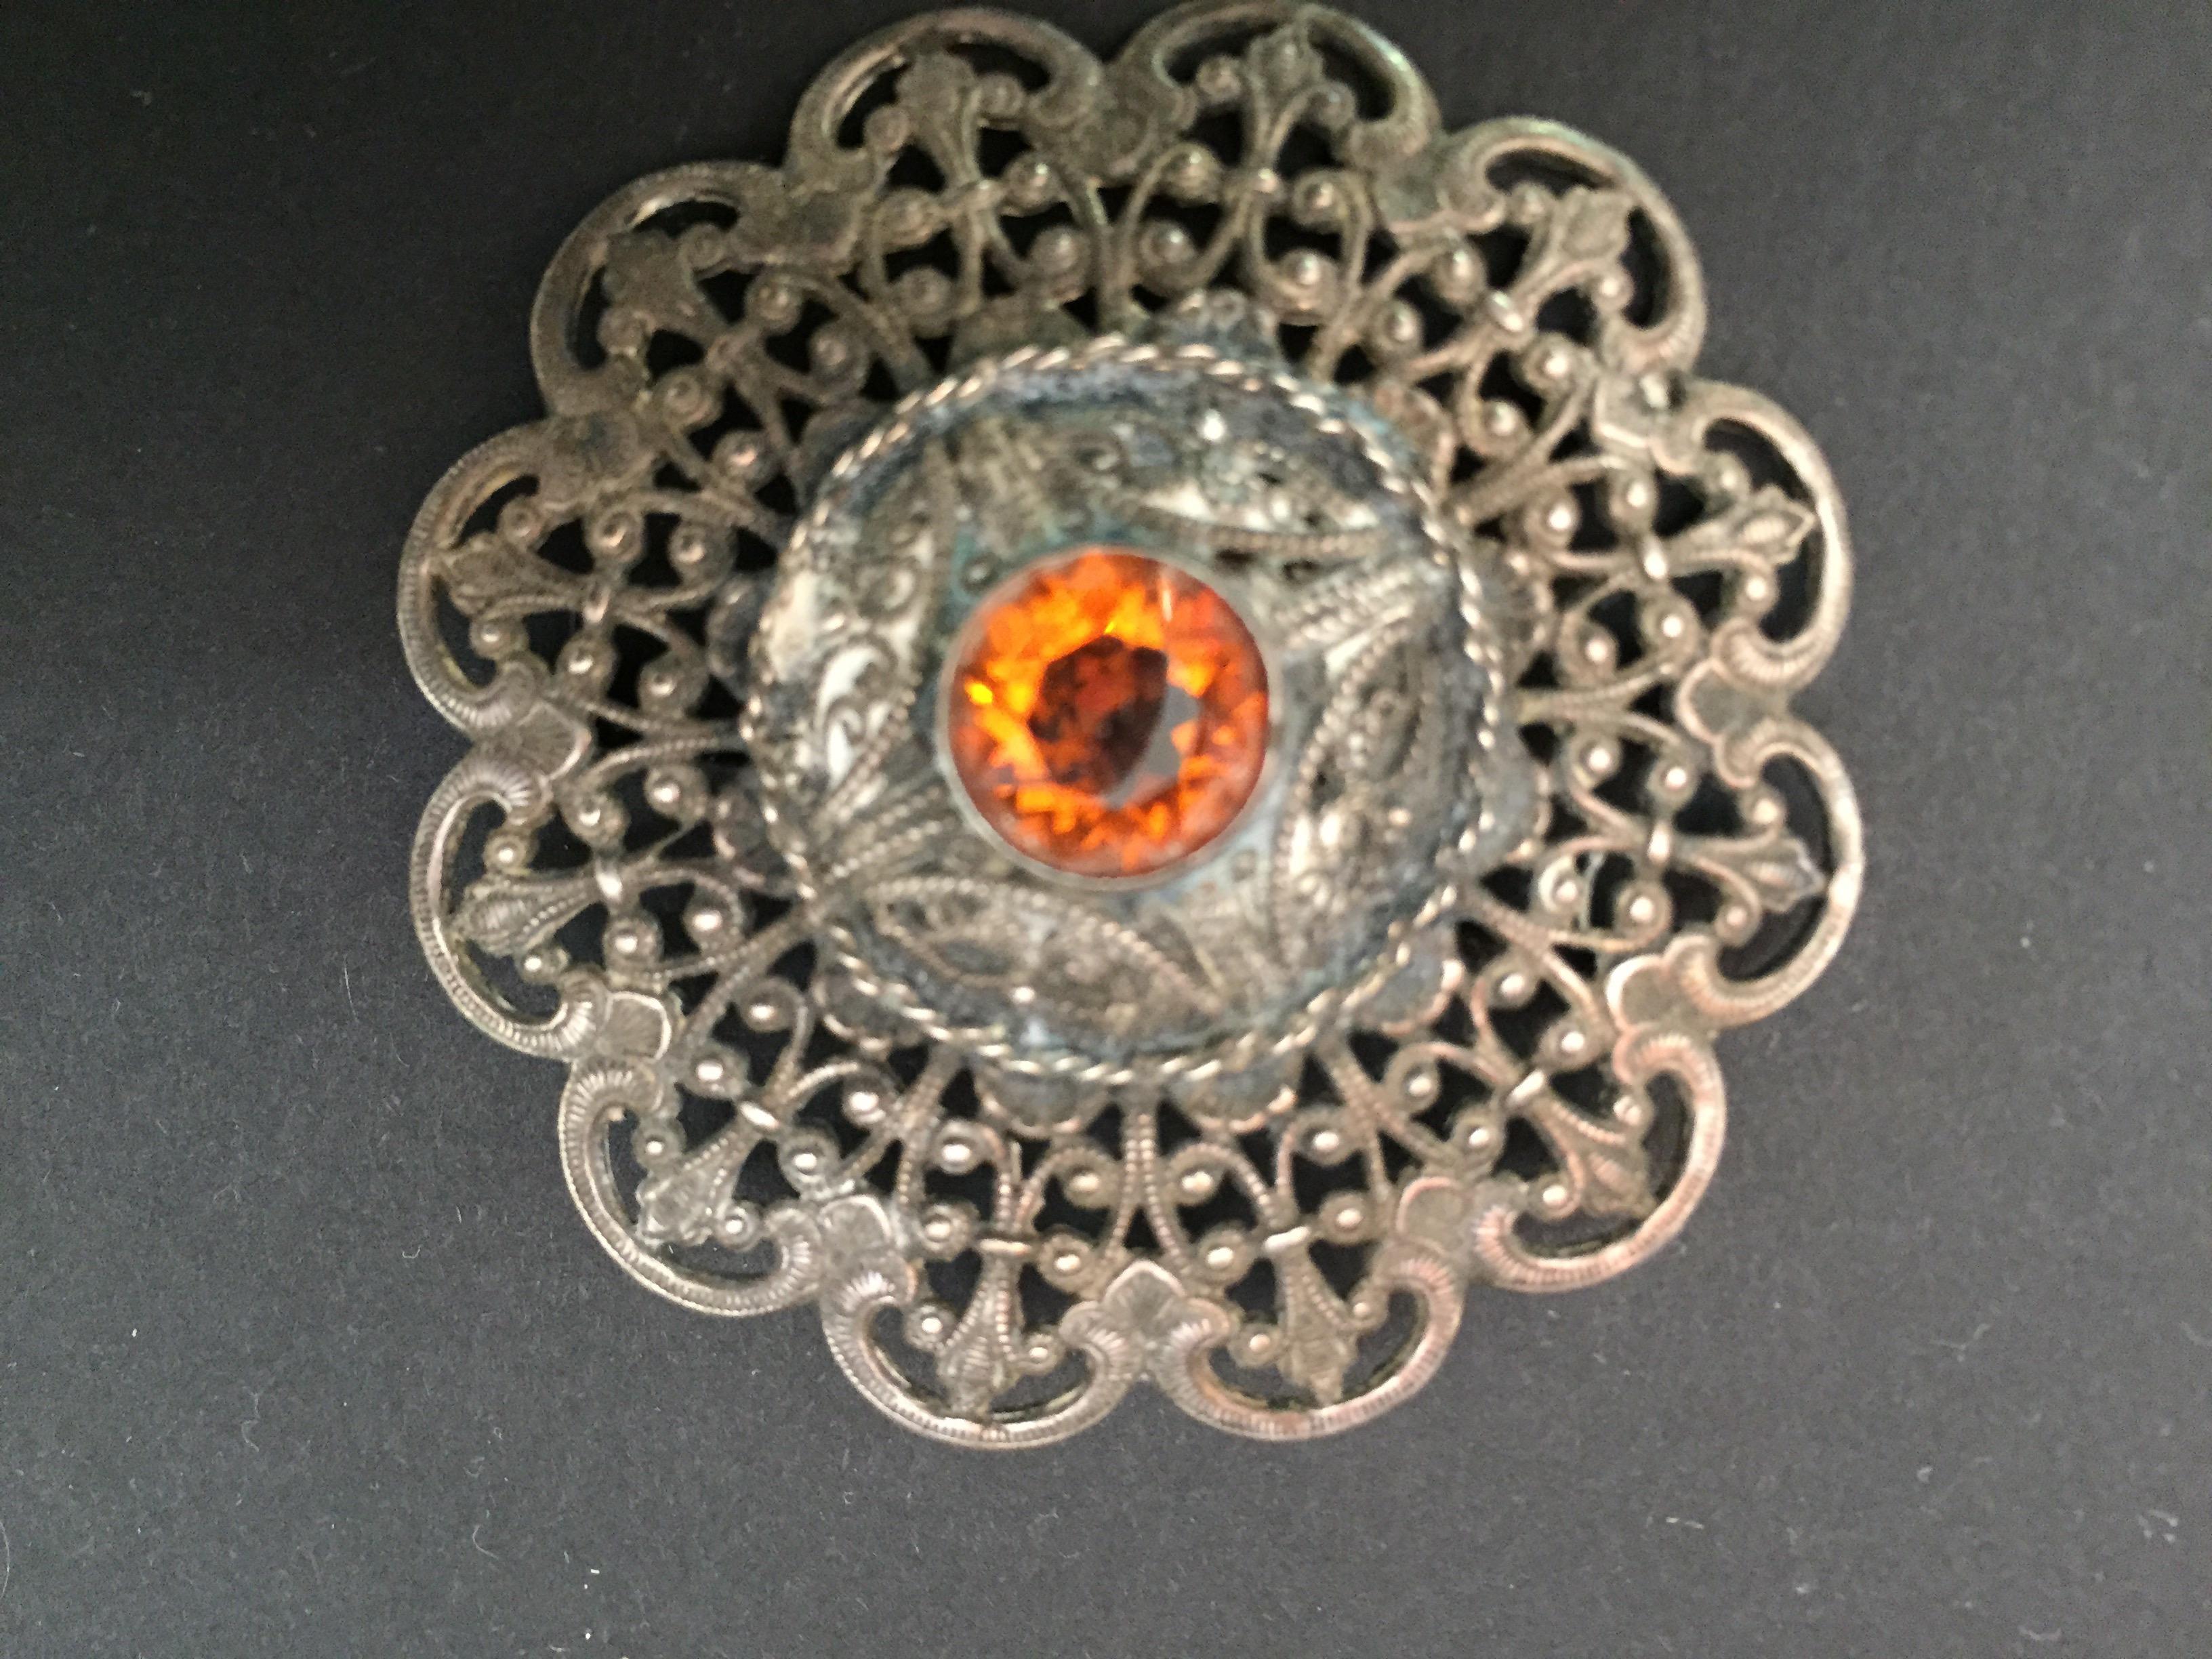 Collectible ottoman style Turkish German silver brooch or veil pin with Moorish filigree.
Middle Eastern collectible silver jewelry brooch pin in circular form.
Stunning 1940s brooch with citrine gemstone.